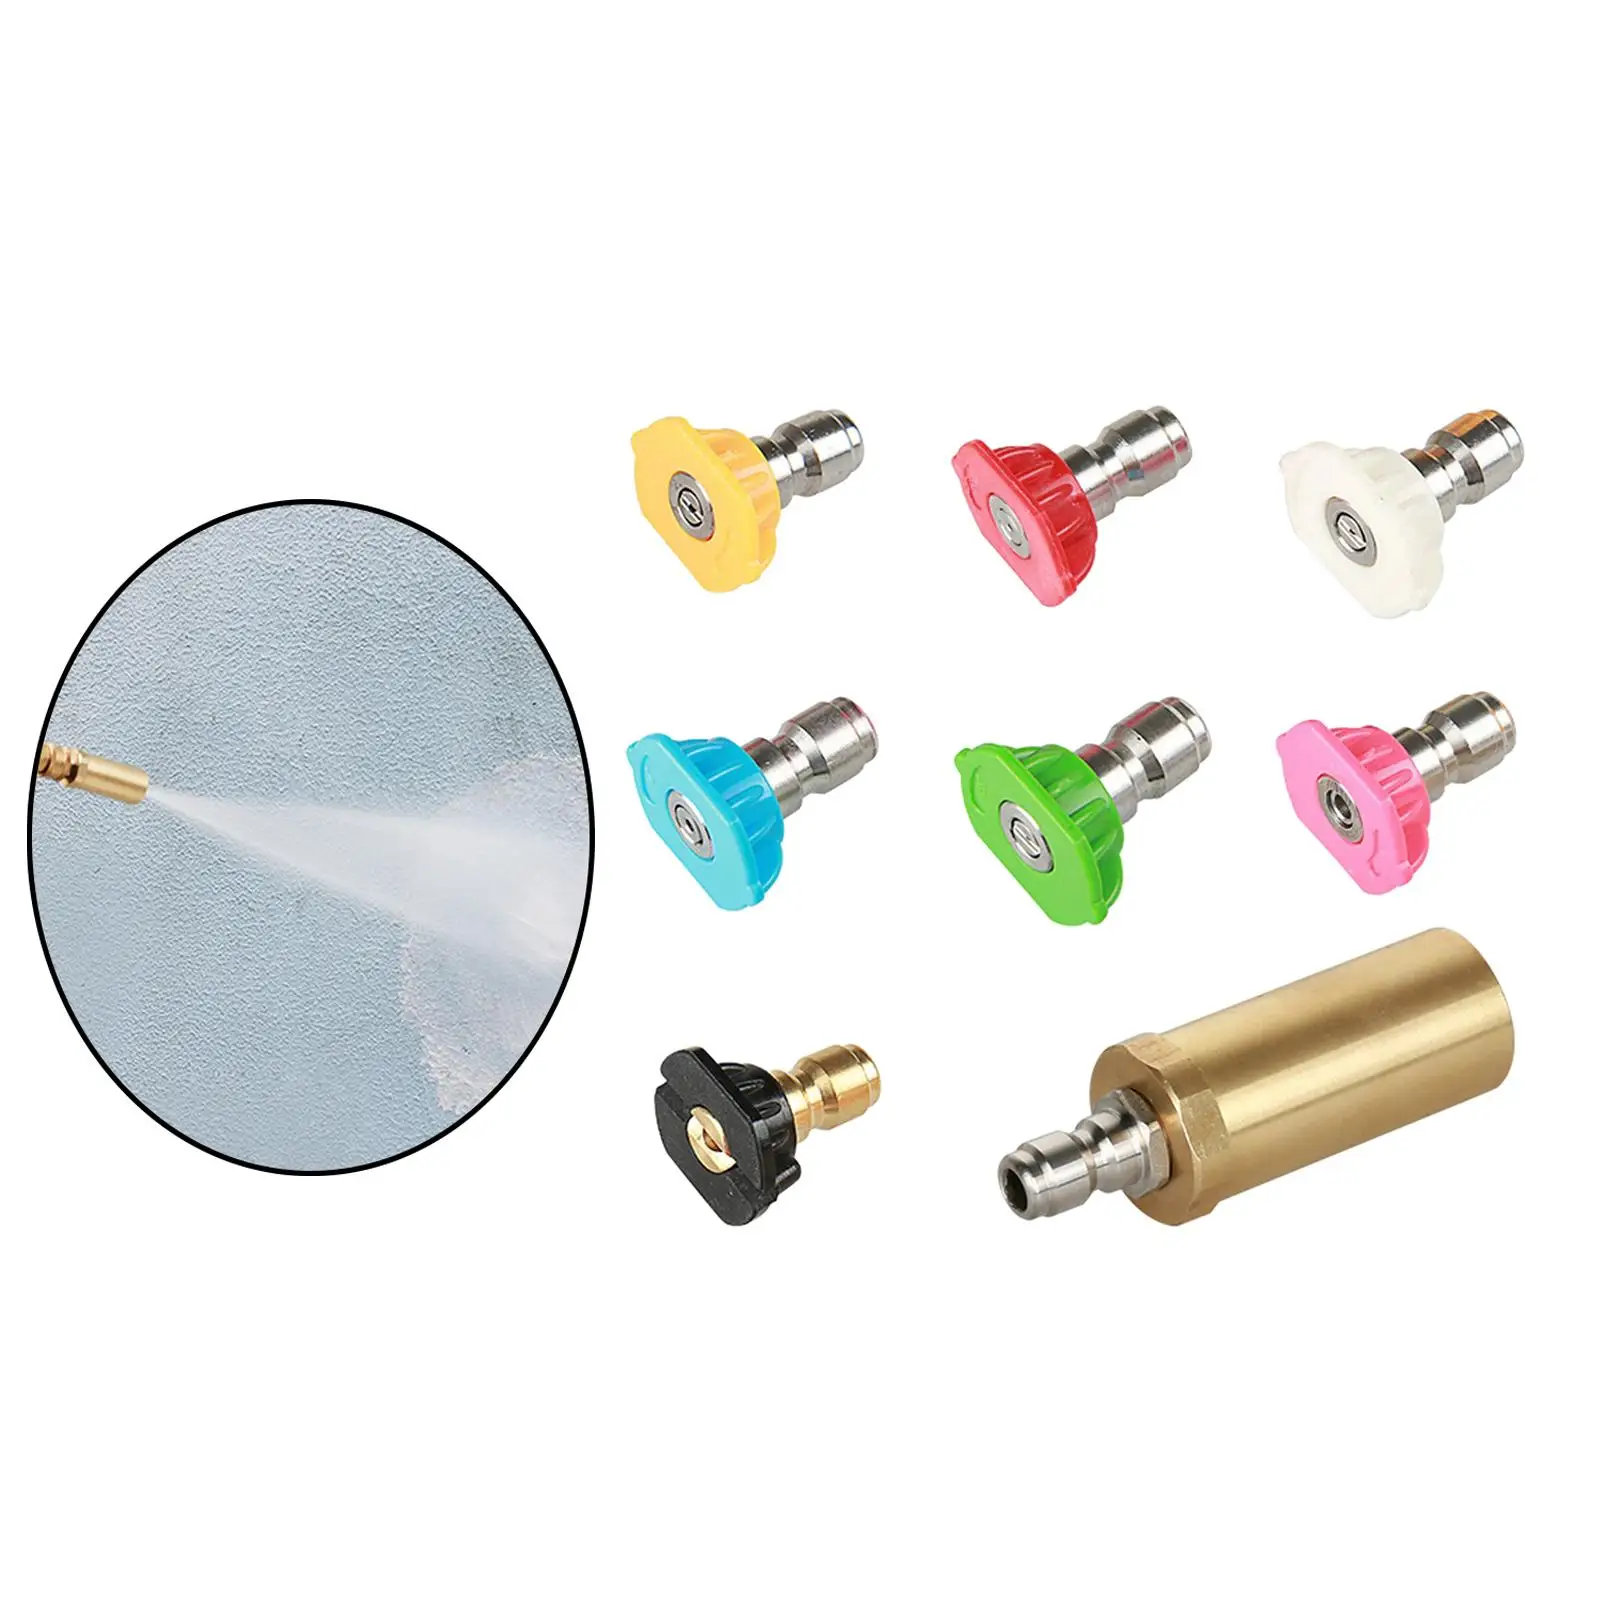 Brass High Pressure Washer Turbo Nozzle with 7 Spray Nozzle Tips Kit 0/15/25/40/65 Degrees,Soap,Rinse for Watering Plants